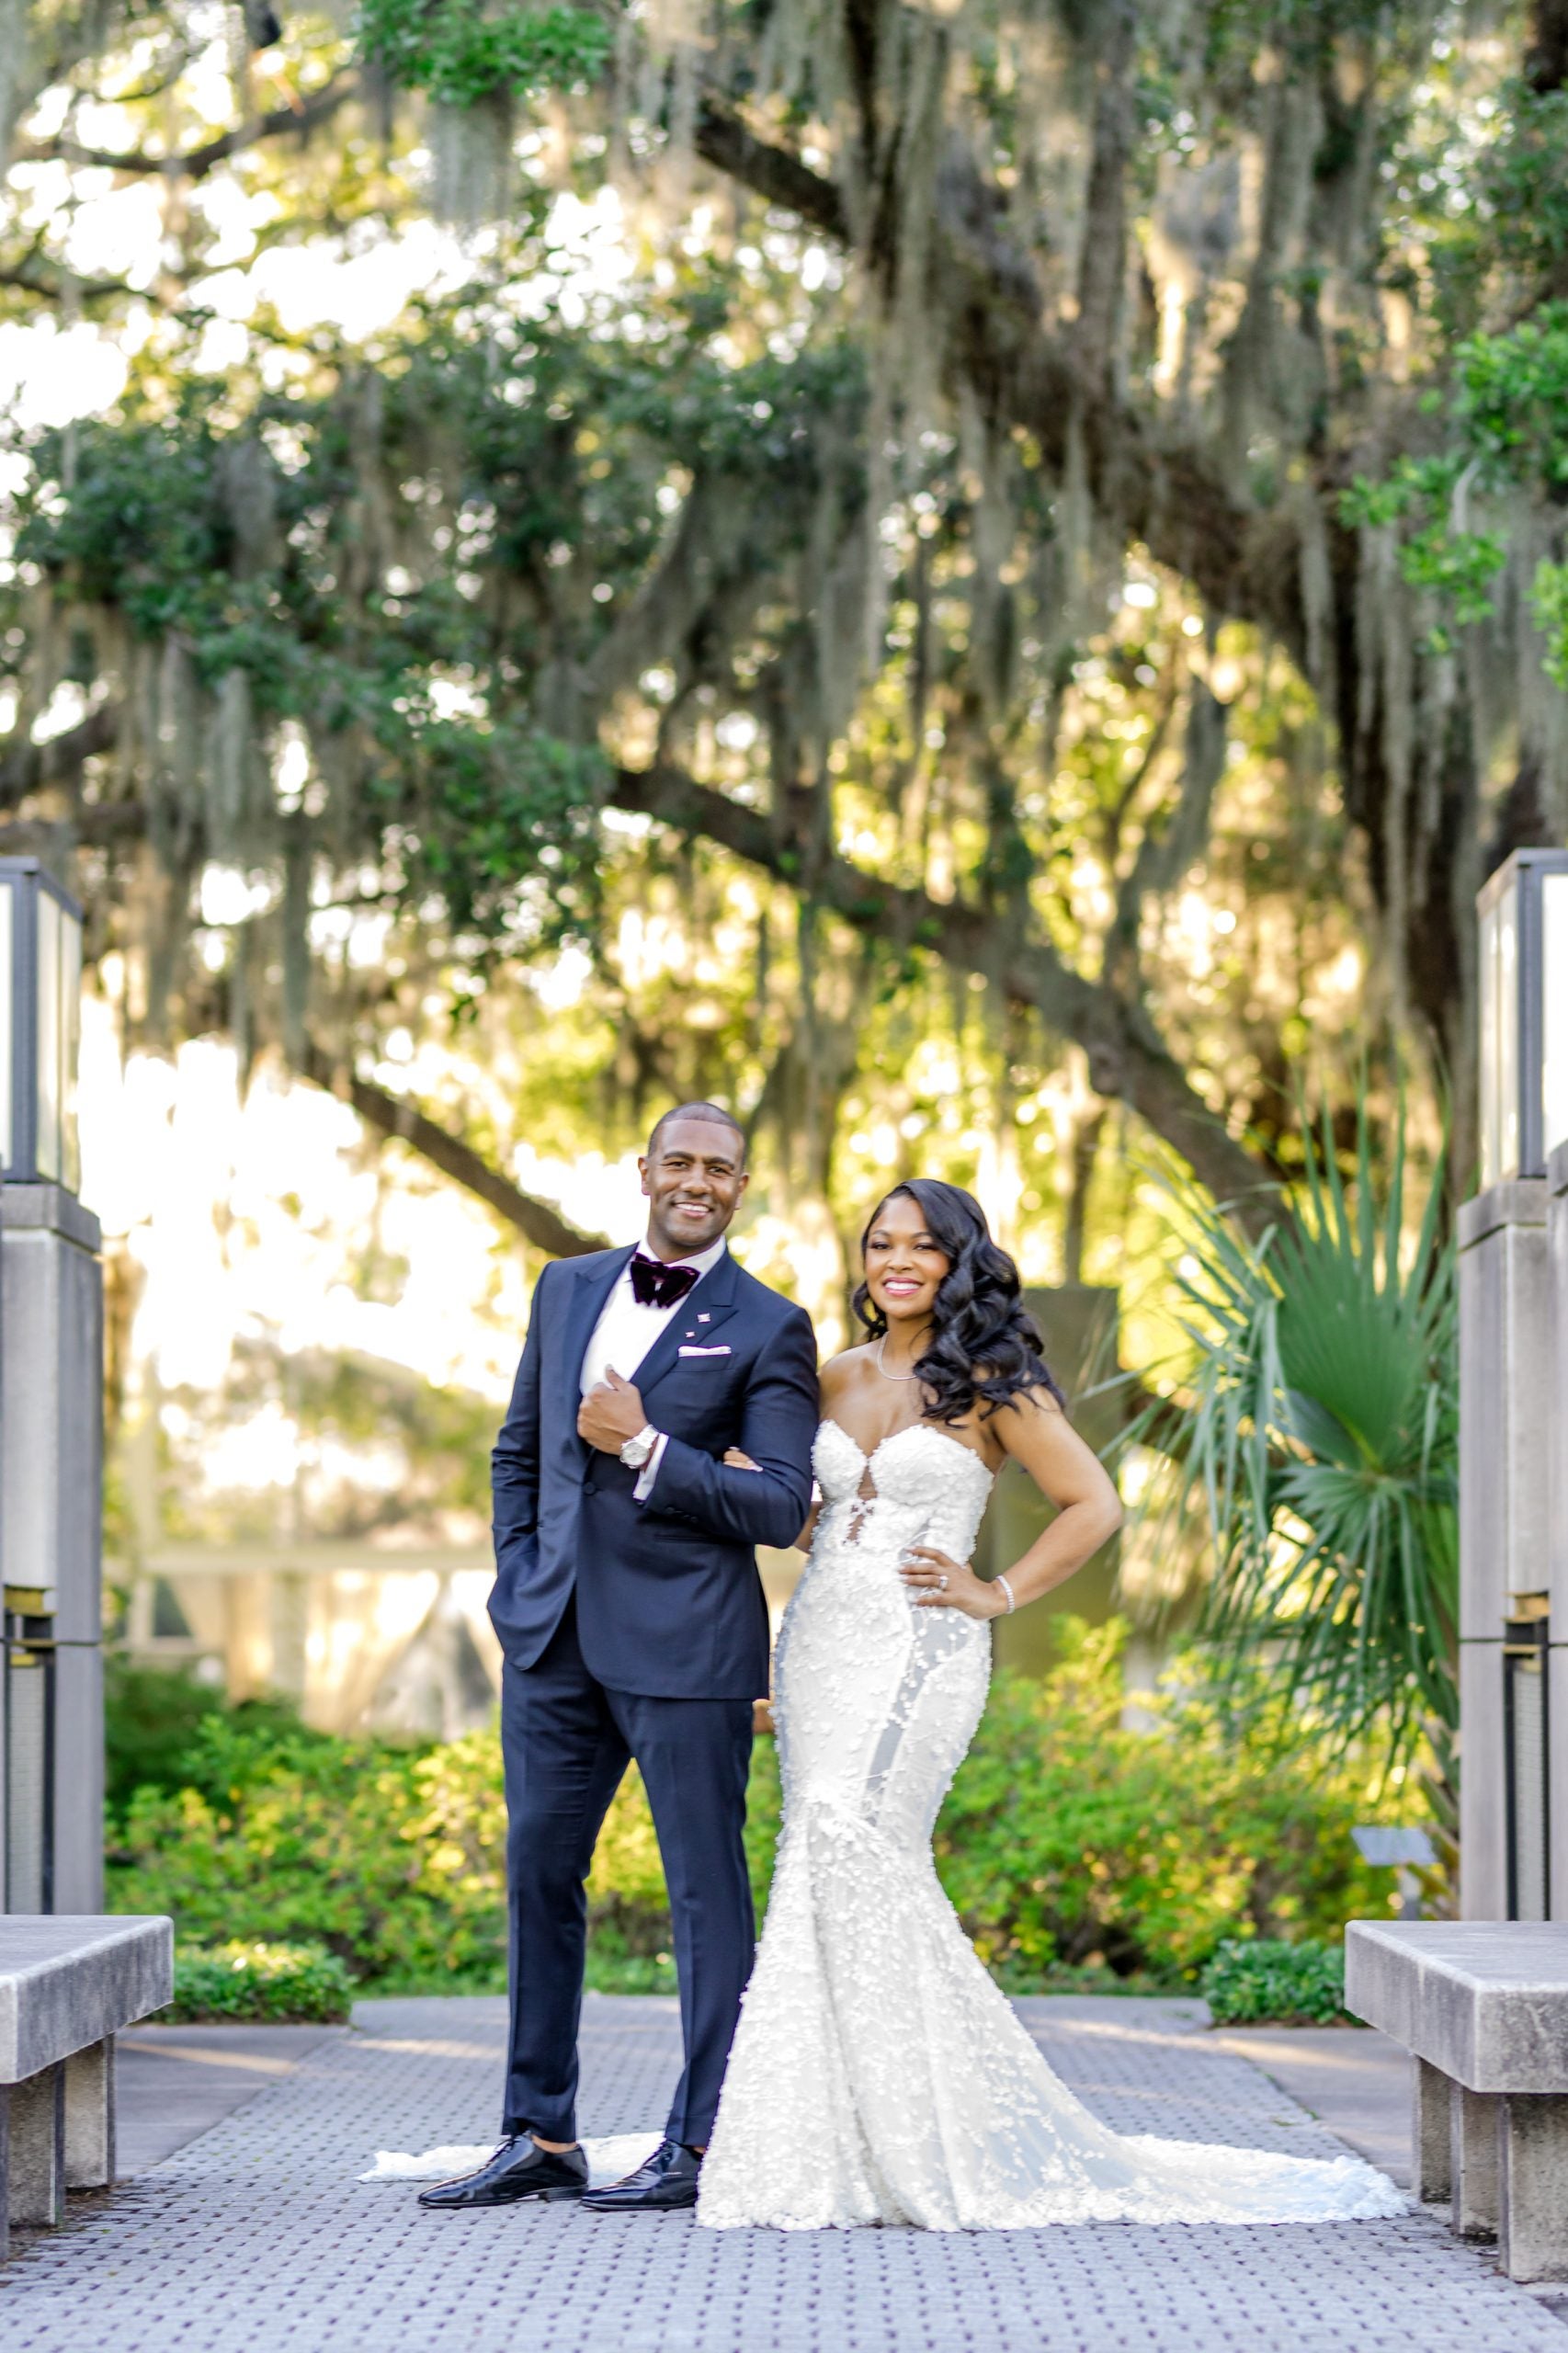 Bridal Bliss: Sevetri And Aulston's NOLA Wedding Had Performances By A Second Line Band, A Gospel Choir — And Juvenile